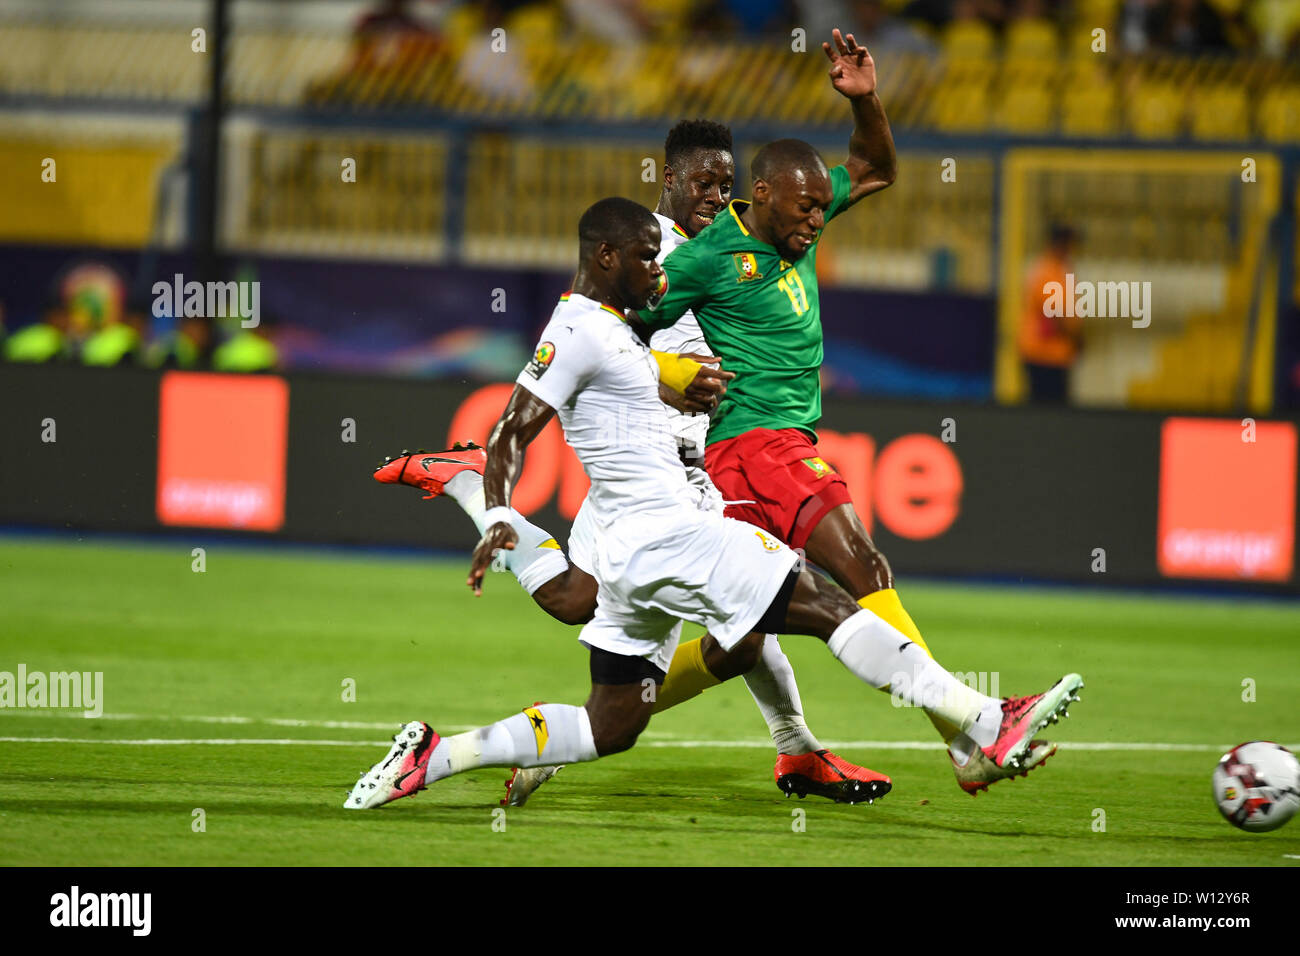 Ismailia, Egypt. 29th June, 2019. Karl Brillant Toko Ekambi (R) of Cameroon vies with Jonathan Mensah and Andrew Kyere-Yiadom of Ghana during the 2019 Africa Cup of Nations Group F match between Cameroon and Ghana in Ismailia, Egypt, on June 29, 2019. The match ended with a 0-0 draw. Credit: Li Yan/Xinhua/Alamy Live News Stock Photo